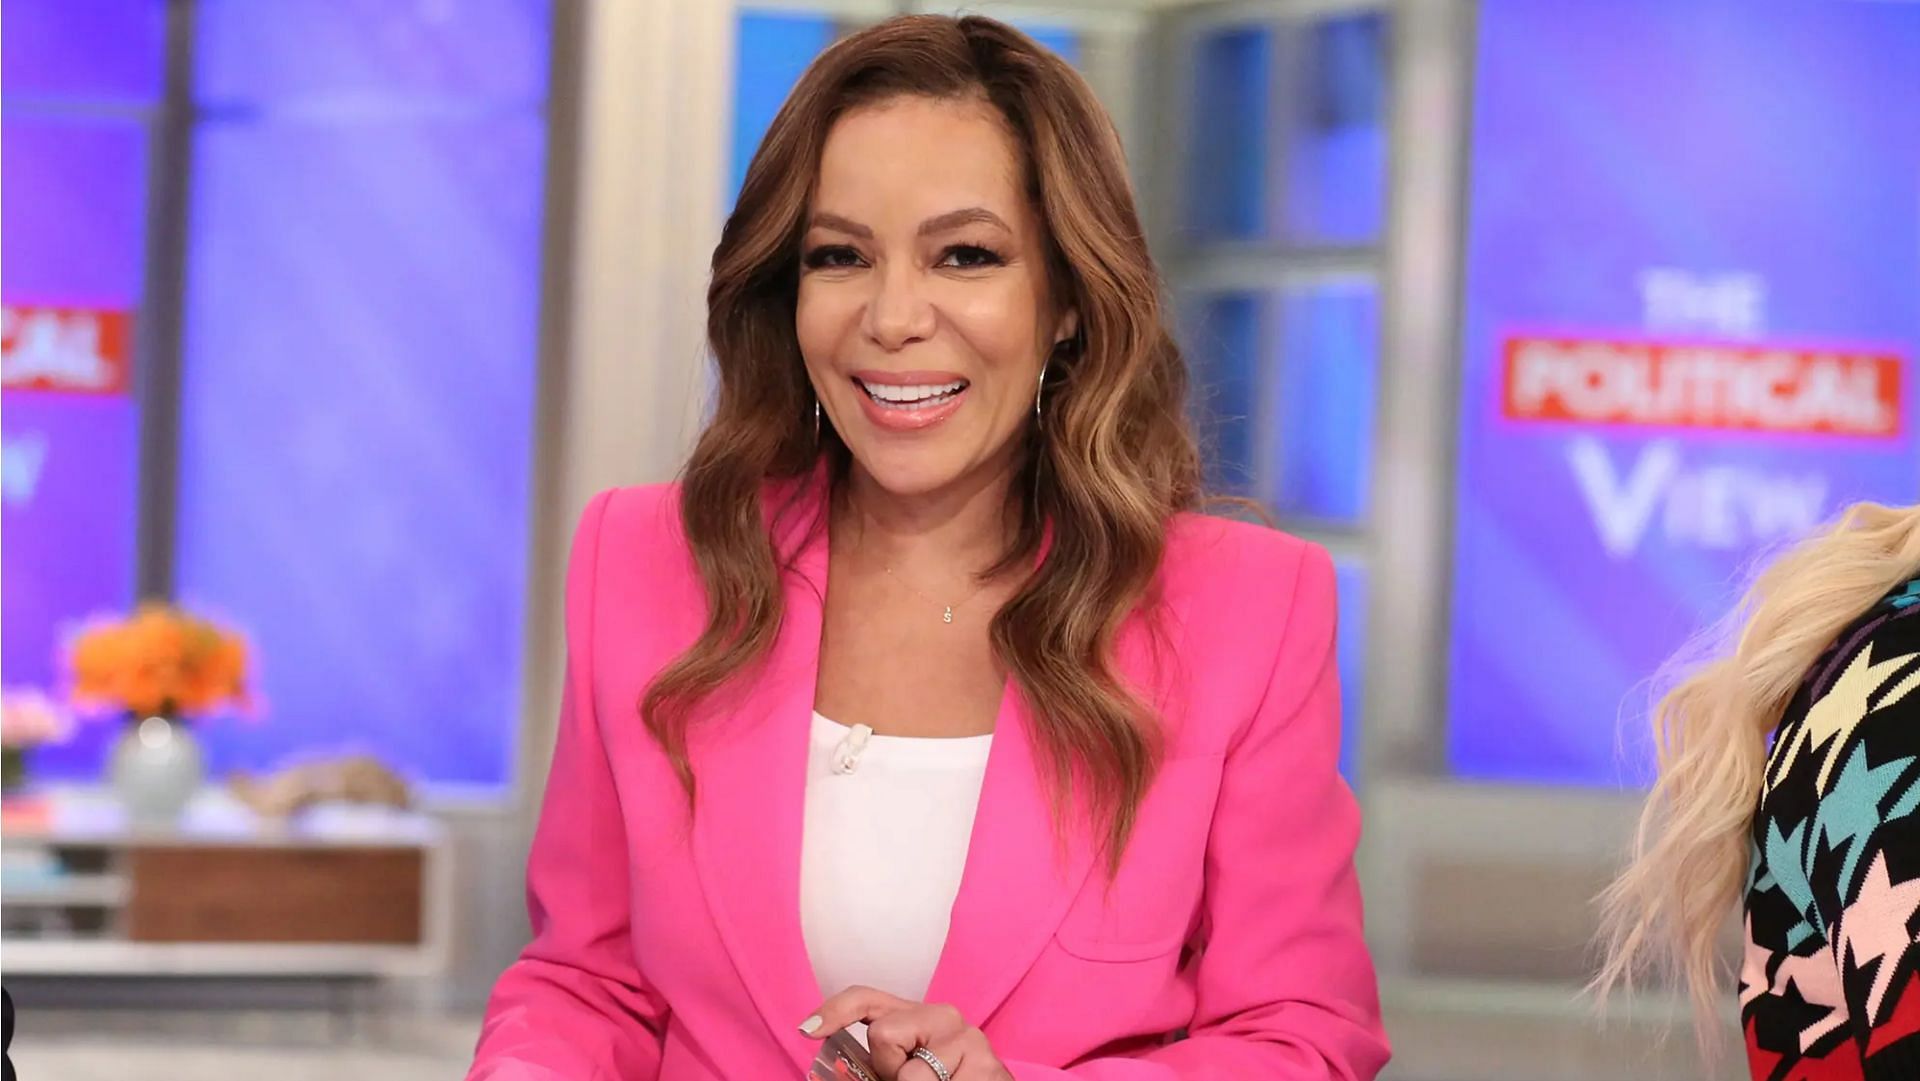 Sunny Hostin has been in the hot waters lately. (Image via Walt Disney Television/Getty)